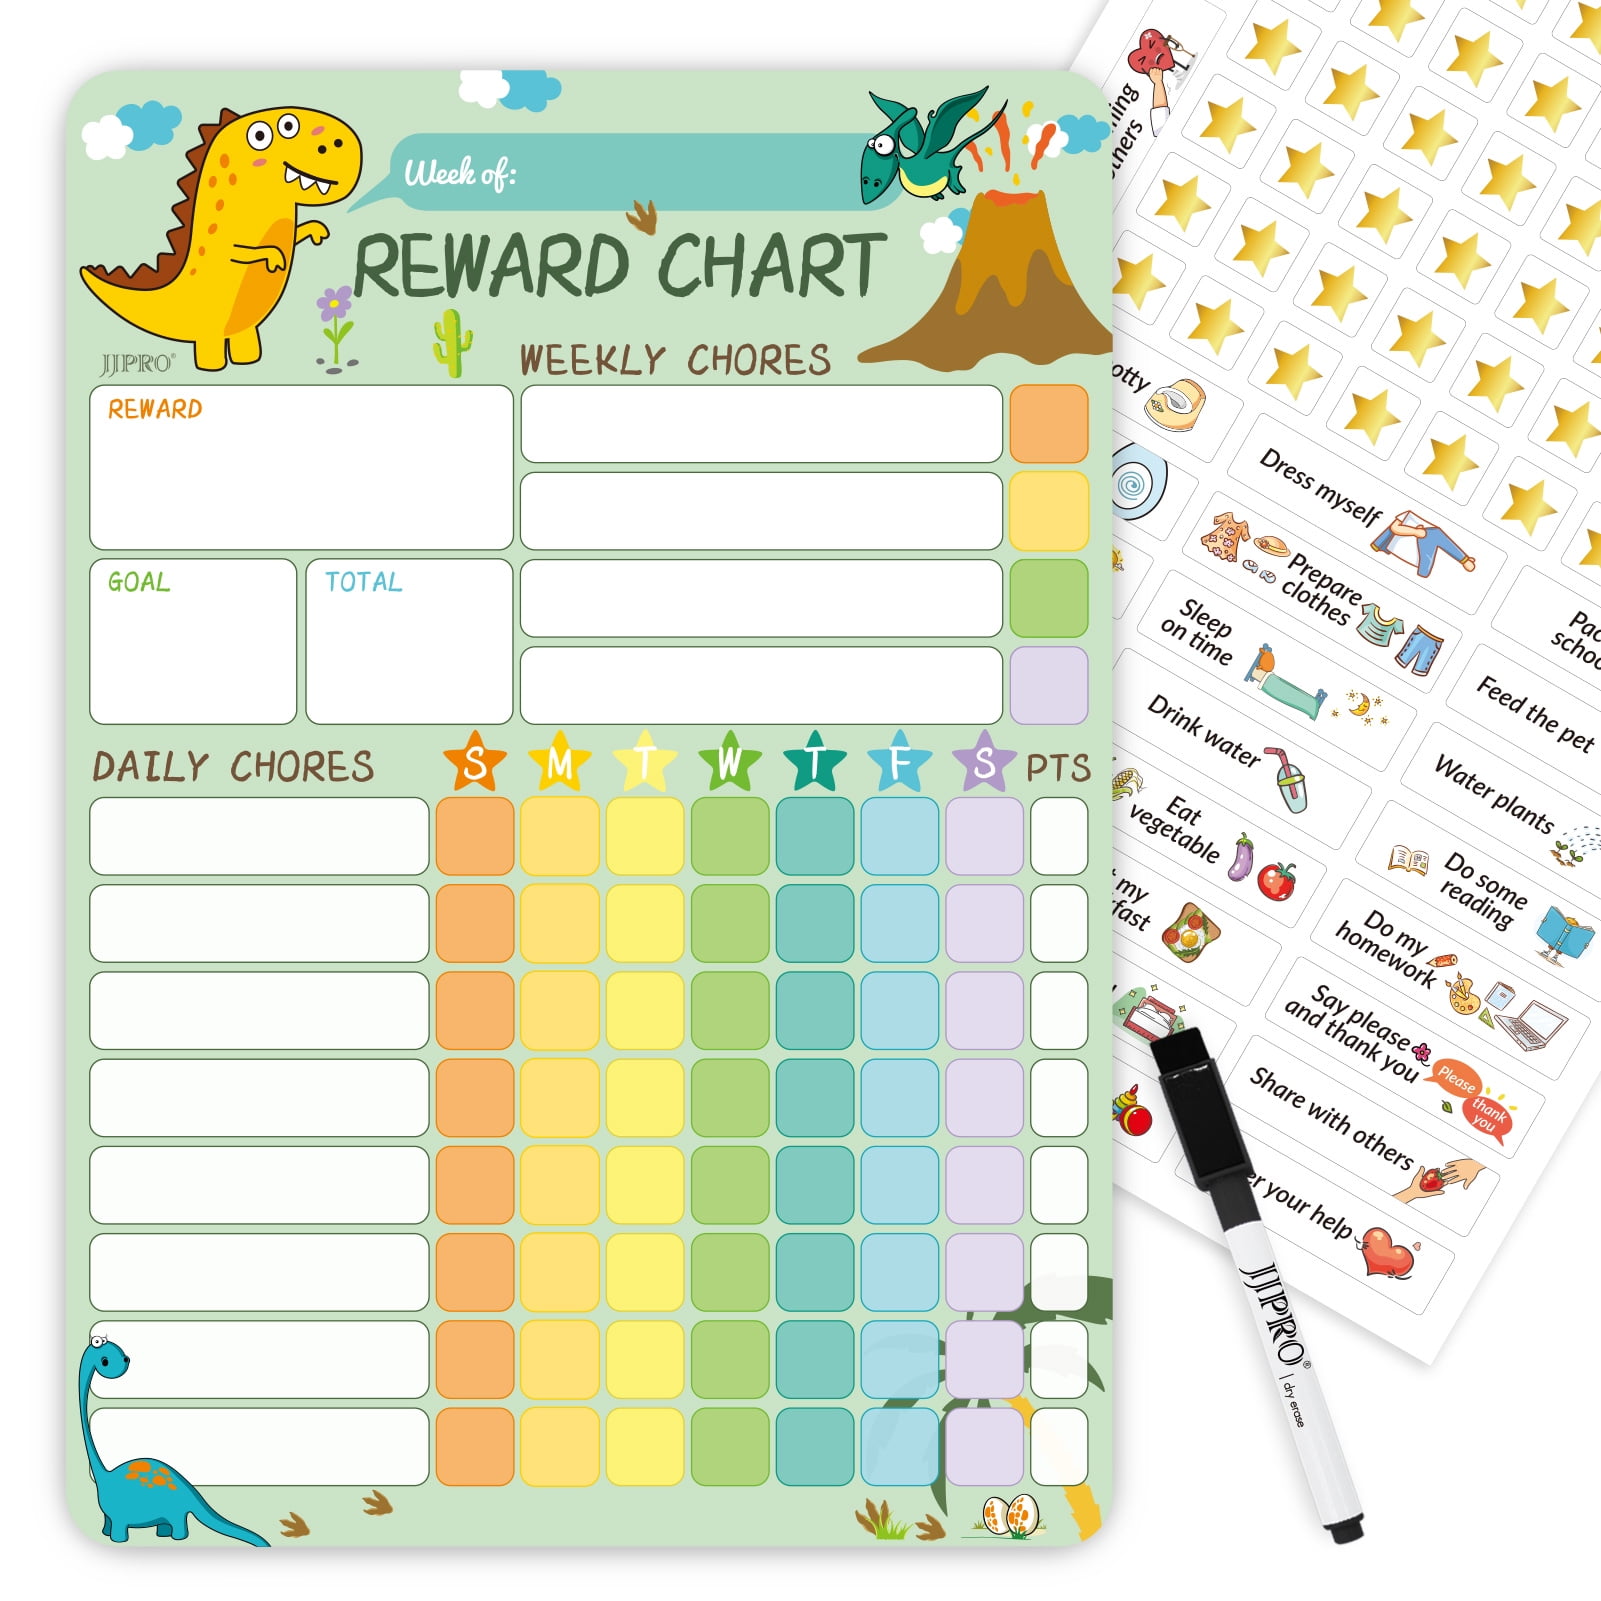 School Smart Chart Paper Pad, 32 x 24 Inches, Unruled, 25 Sheets 